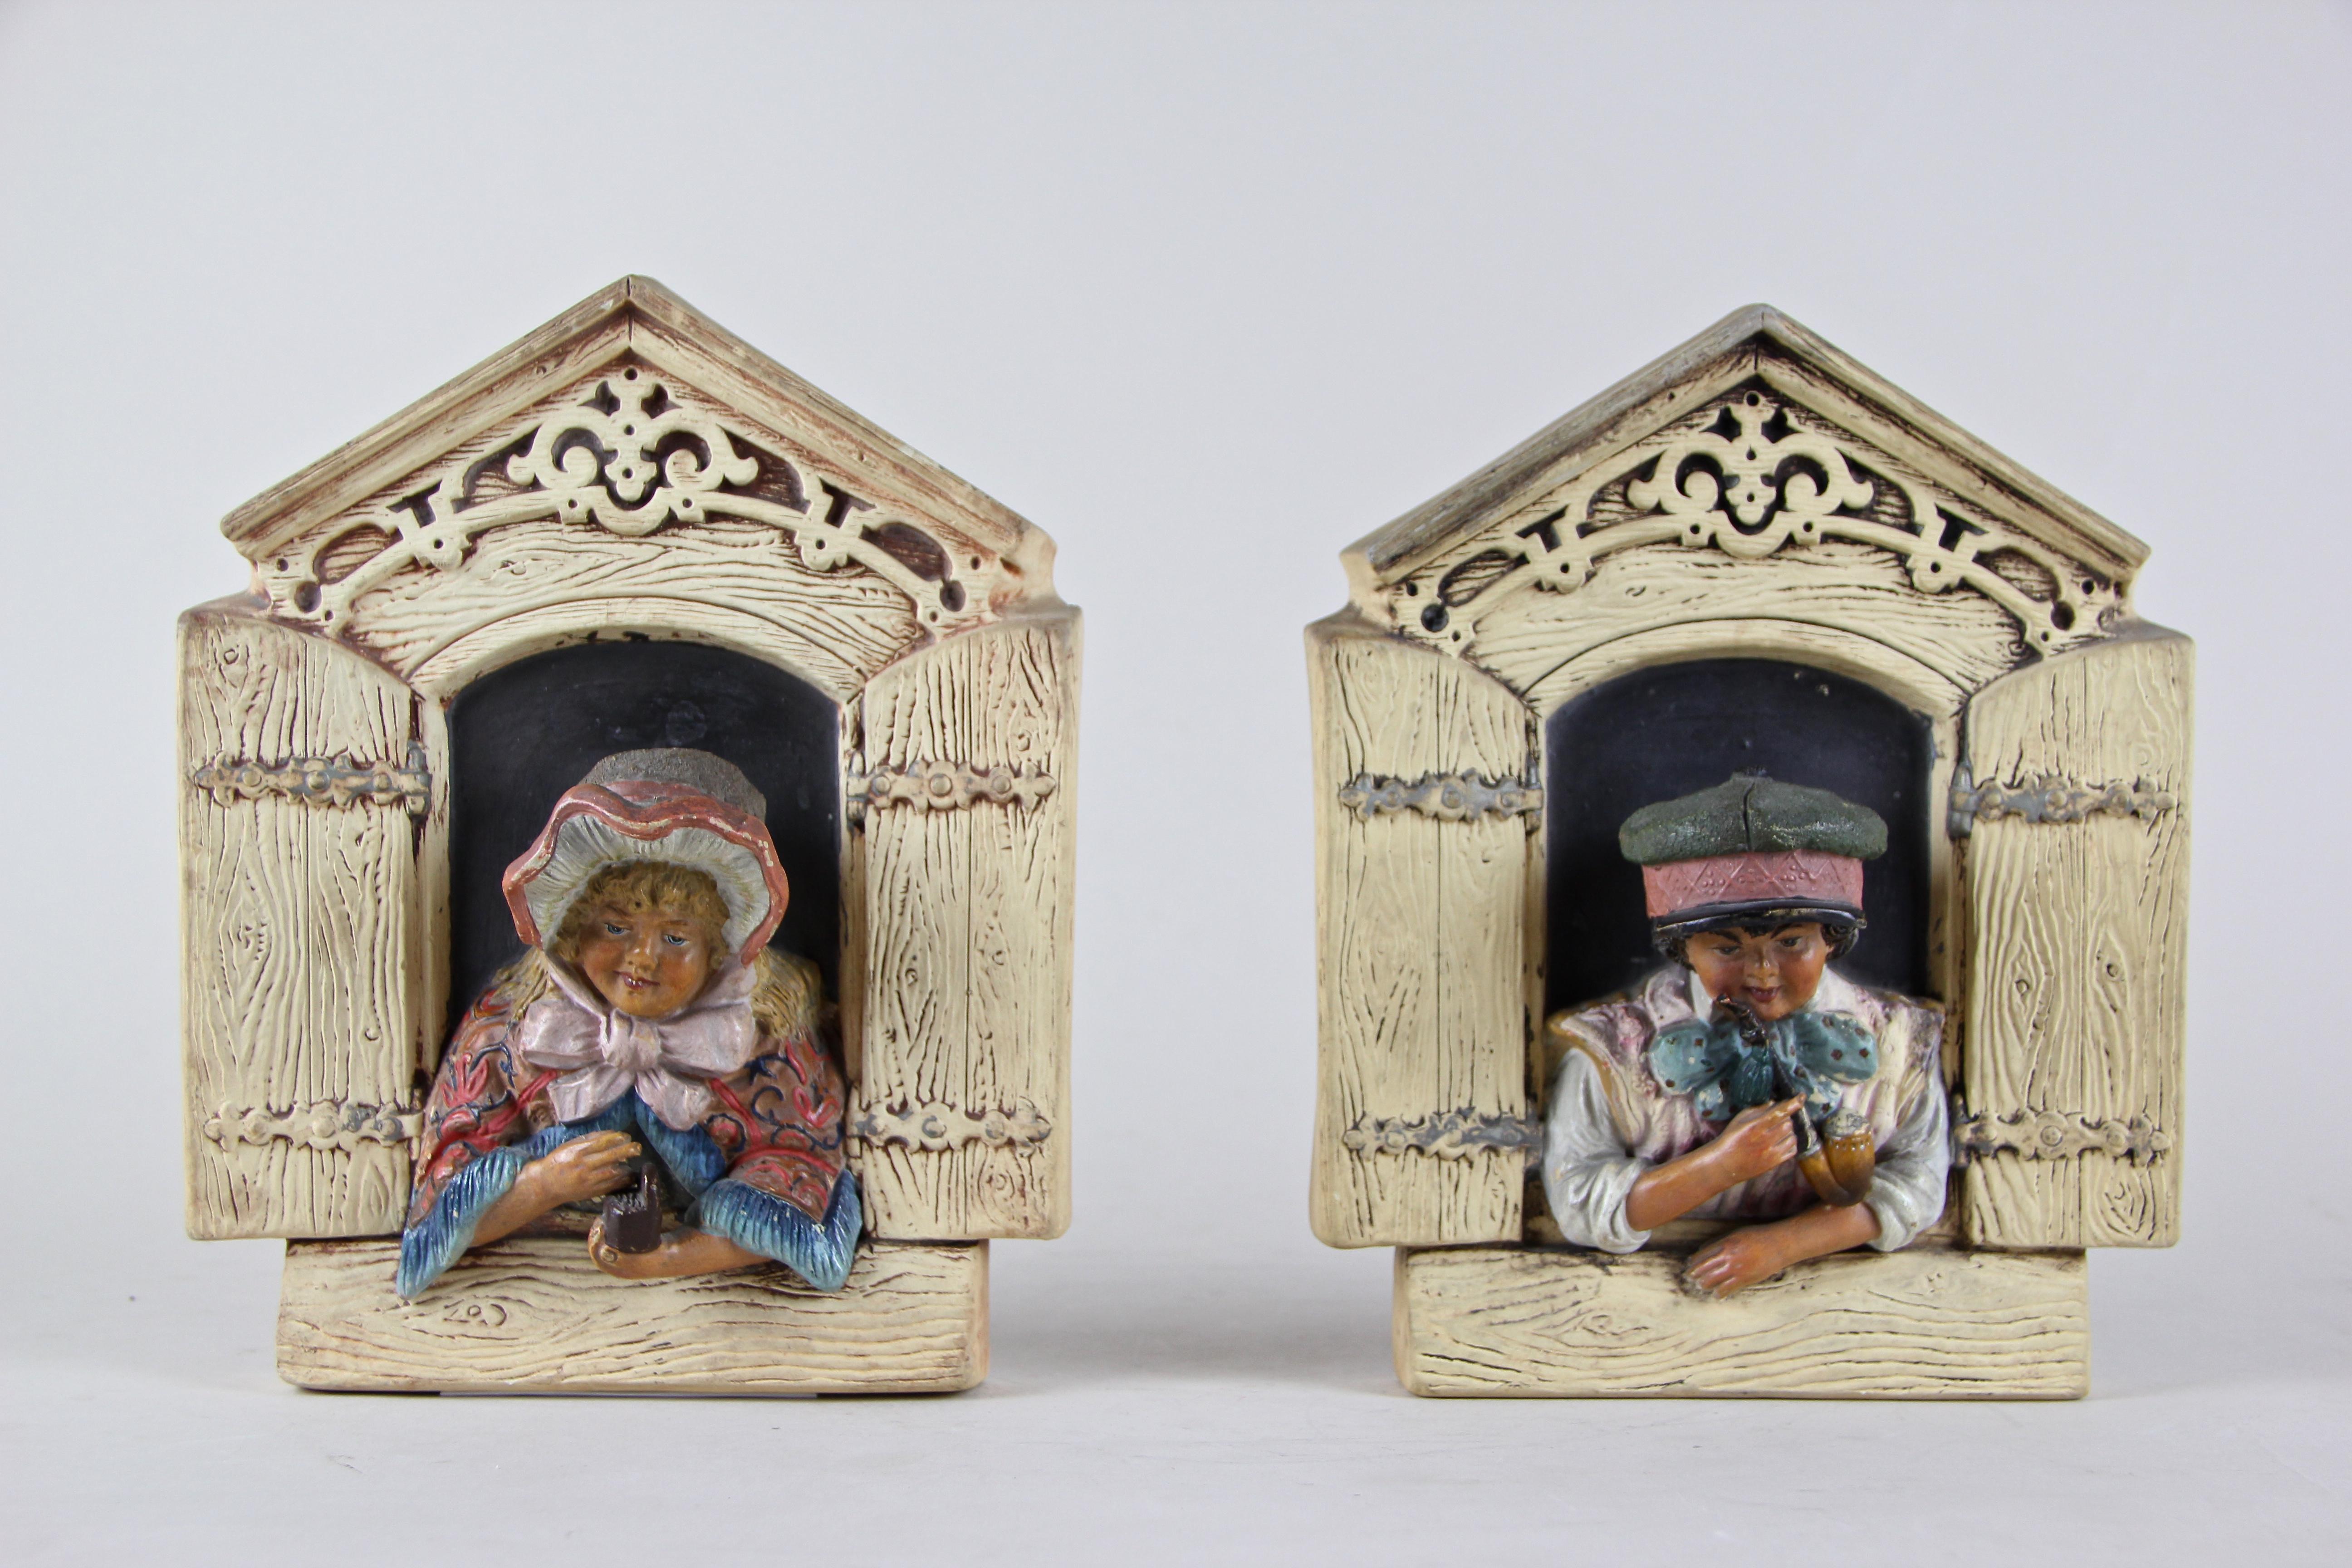 Lovely set of Majolica wall sculptures by Johann Maresch. Out of Bohemia circa 1895 we present to you this two 